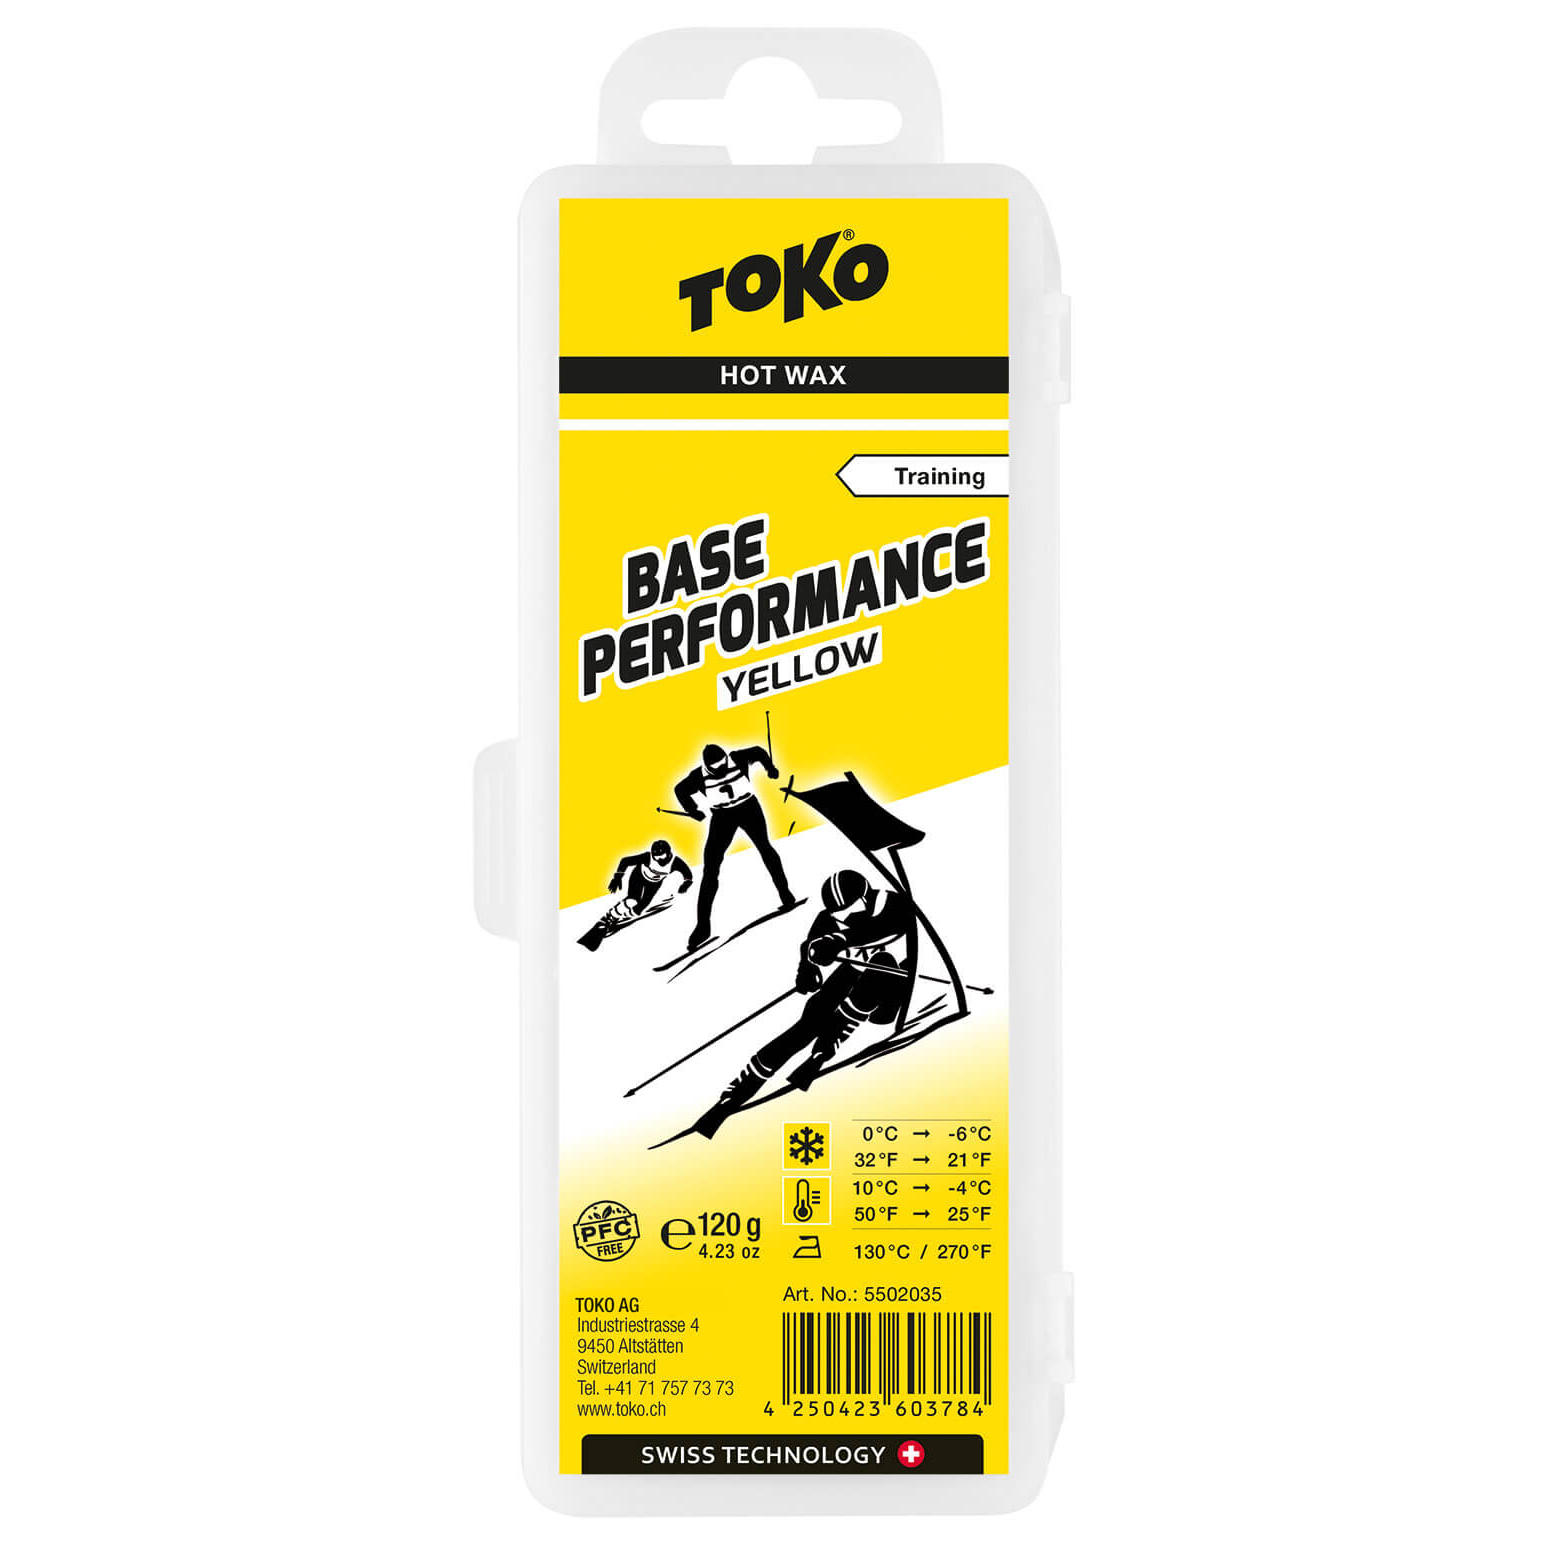 A product picture of the Toko Base Performance Yellow Paraffin Melt Wax